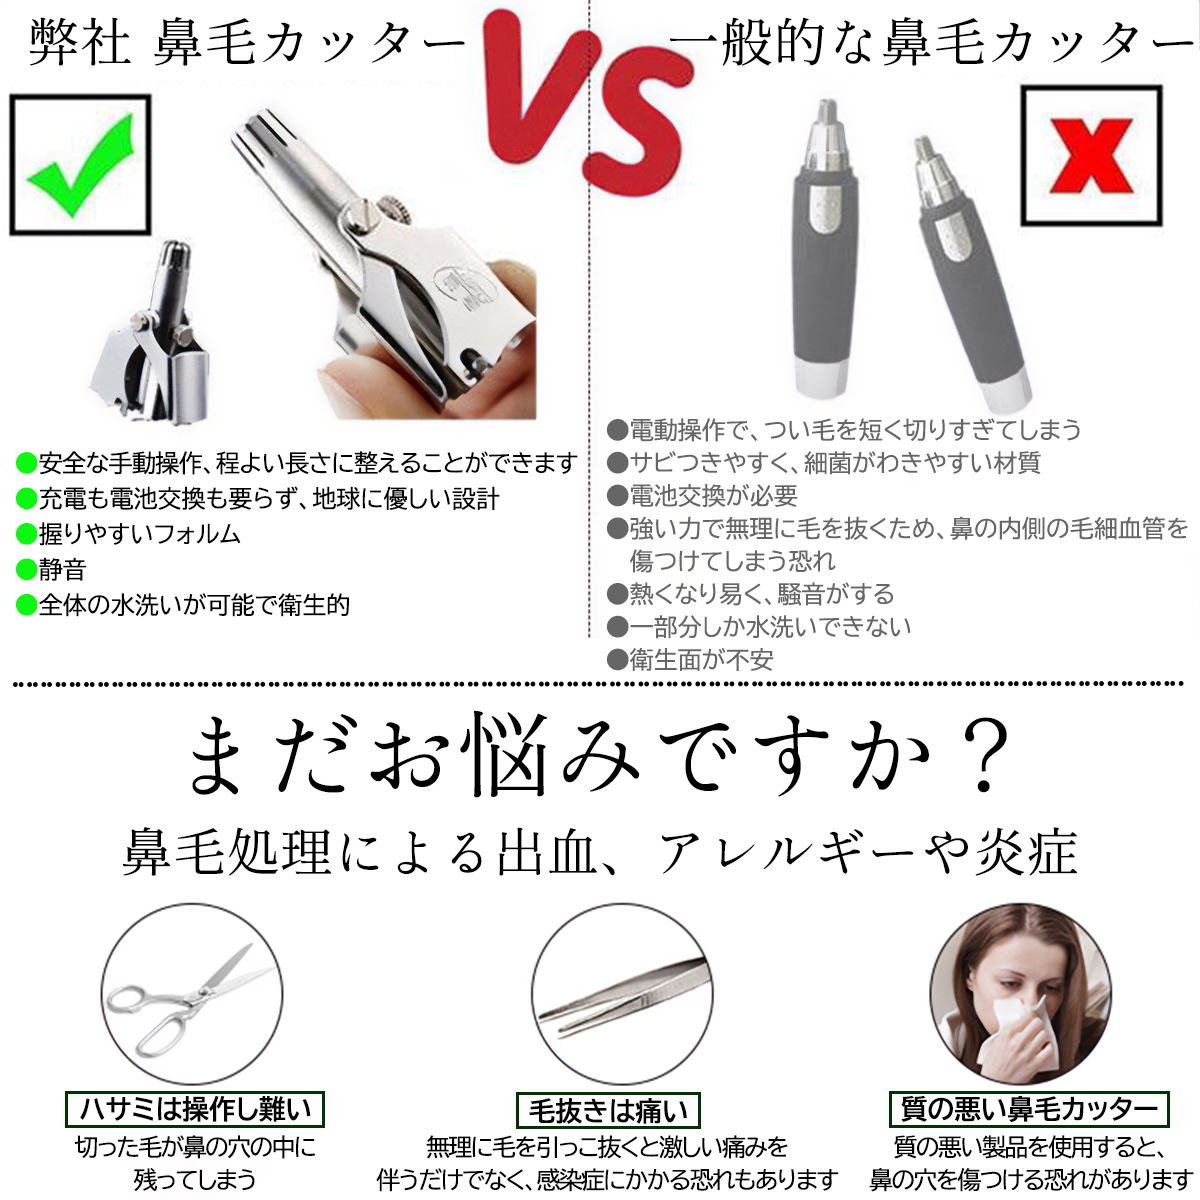  nasal hair cutter nasal hair processing nasal hair barber's clippers washing with water OK etiquette cutter manual electric fee 0 jpy ear wool. processing also brush attaching small size man woman nasal hair trimmer carrying convenience 